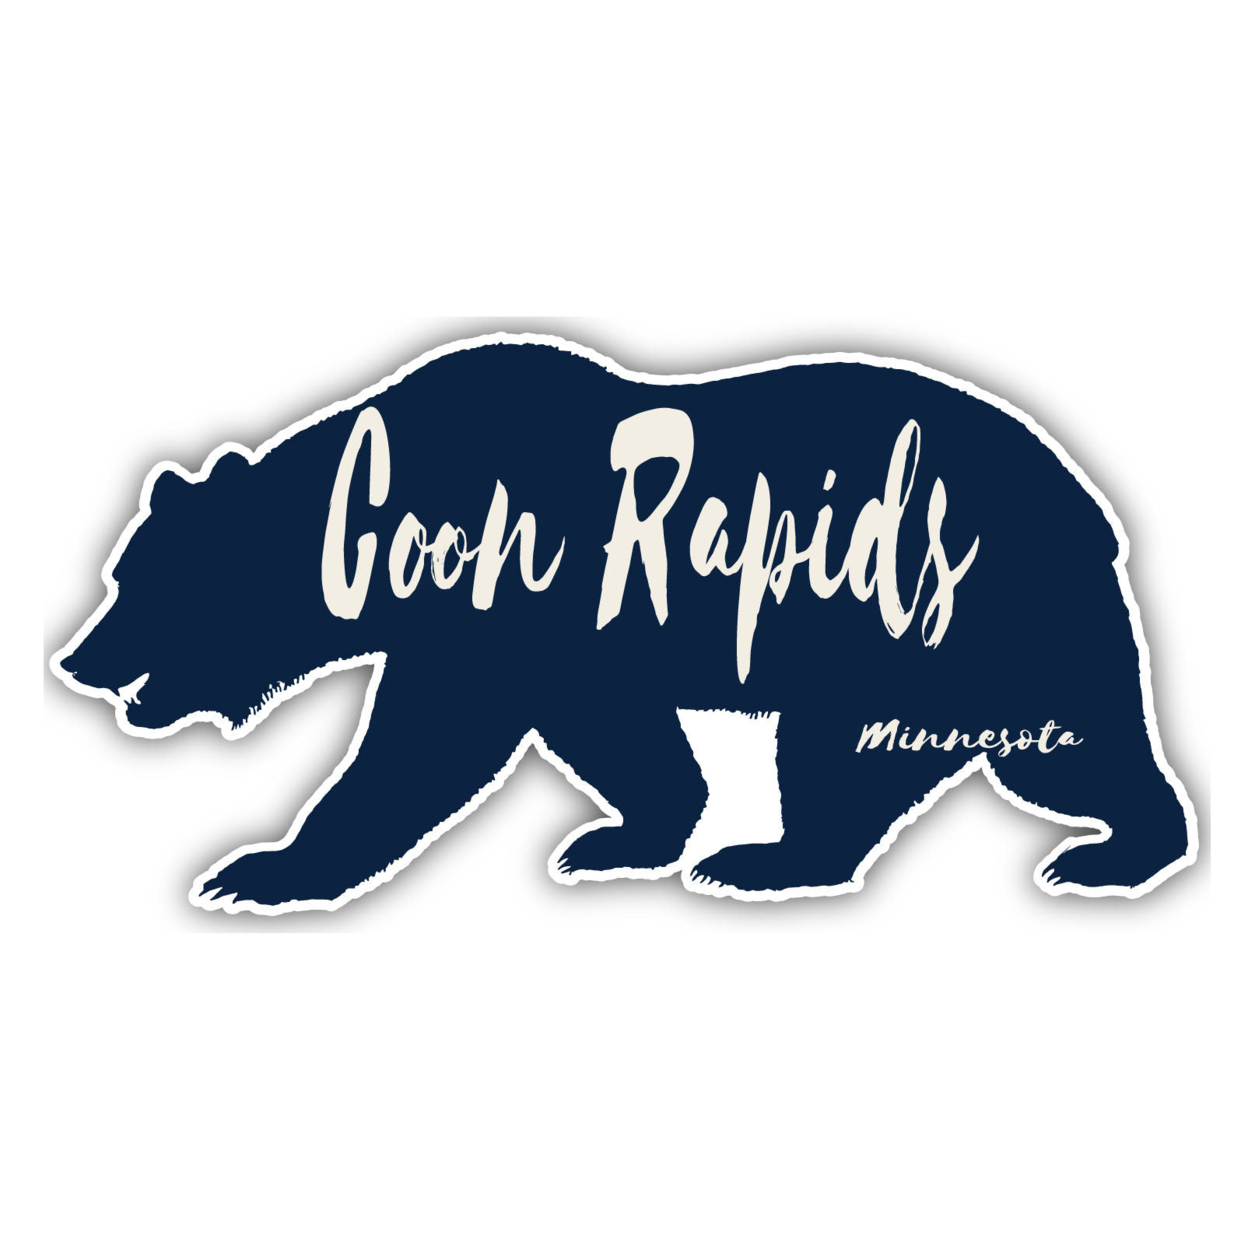 Coon Rapids Minnesota Souvenir Decorative Stickers (Choose Theme And Size) - 4-Pack, 12-Inch, Camp Life